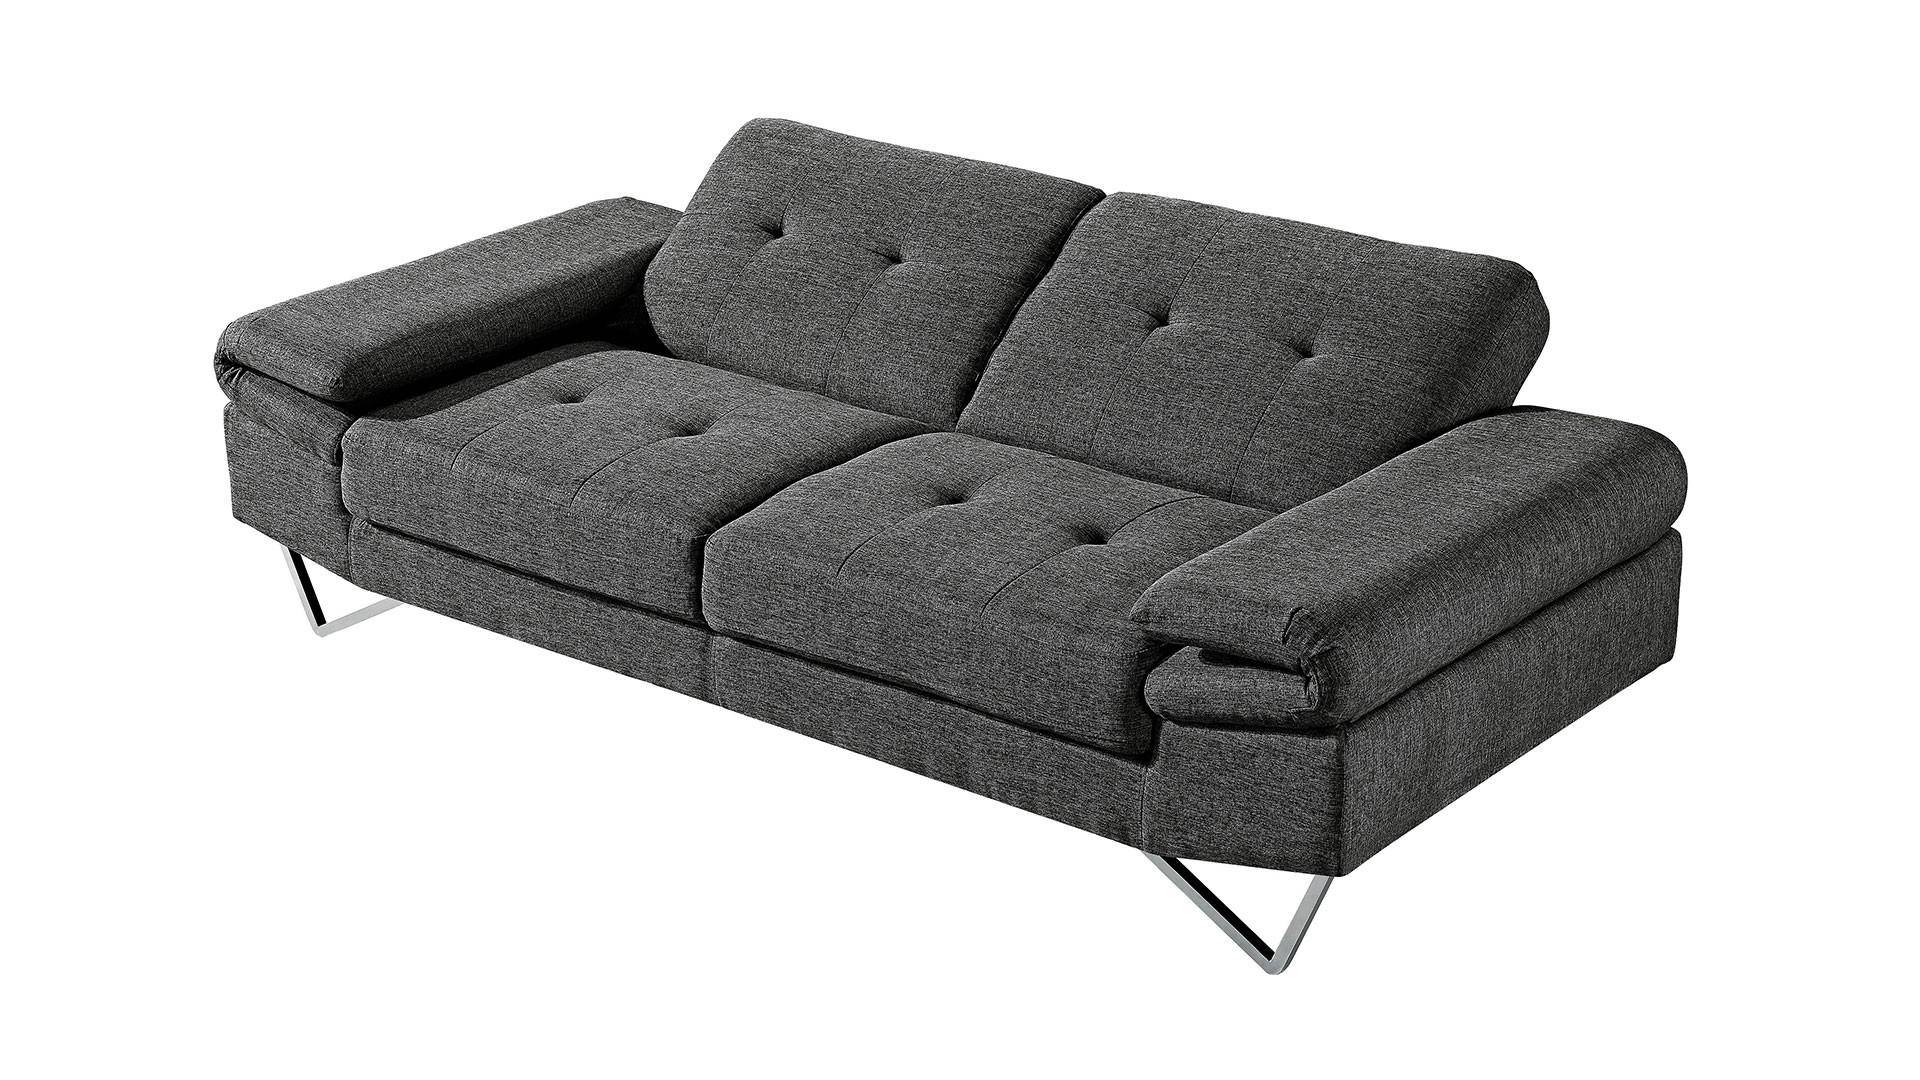 At Home USA Lucia Grey Fabric Tufted Sofa Sleeper Contemporary Modern order  online